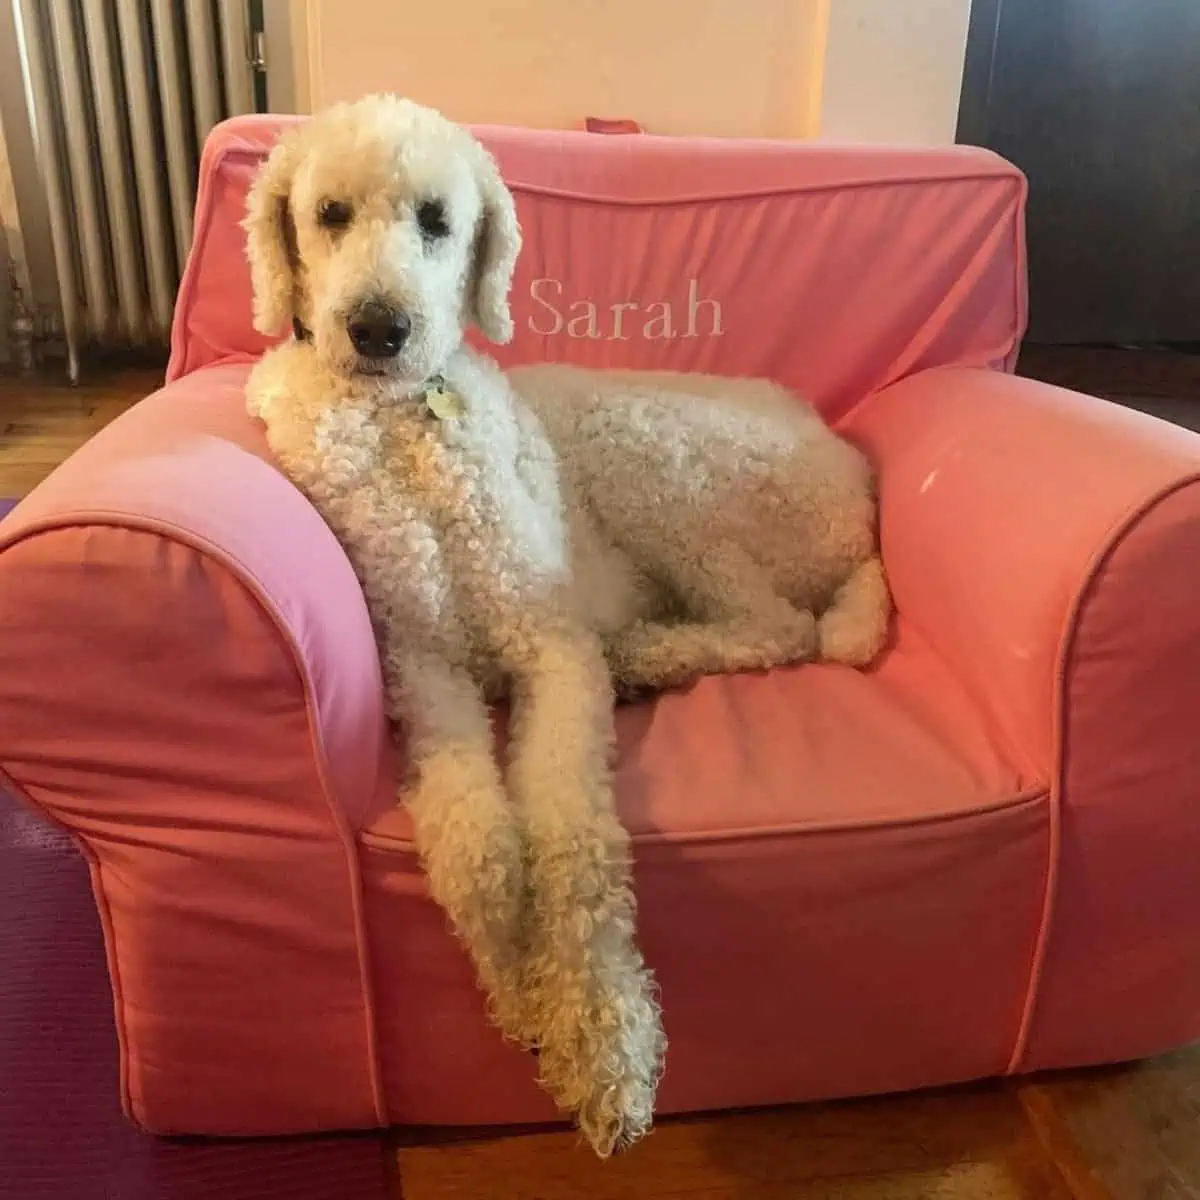 Poodle sitting on pink chair